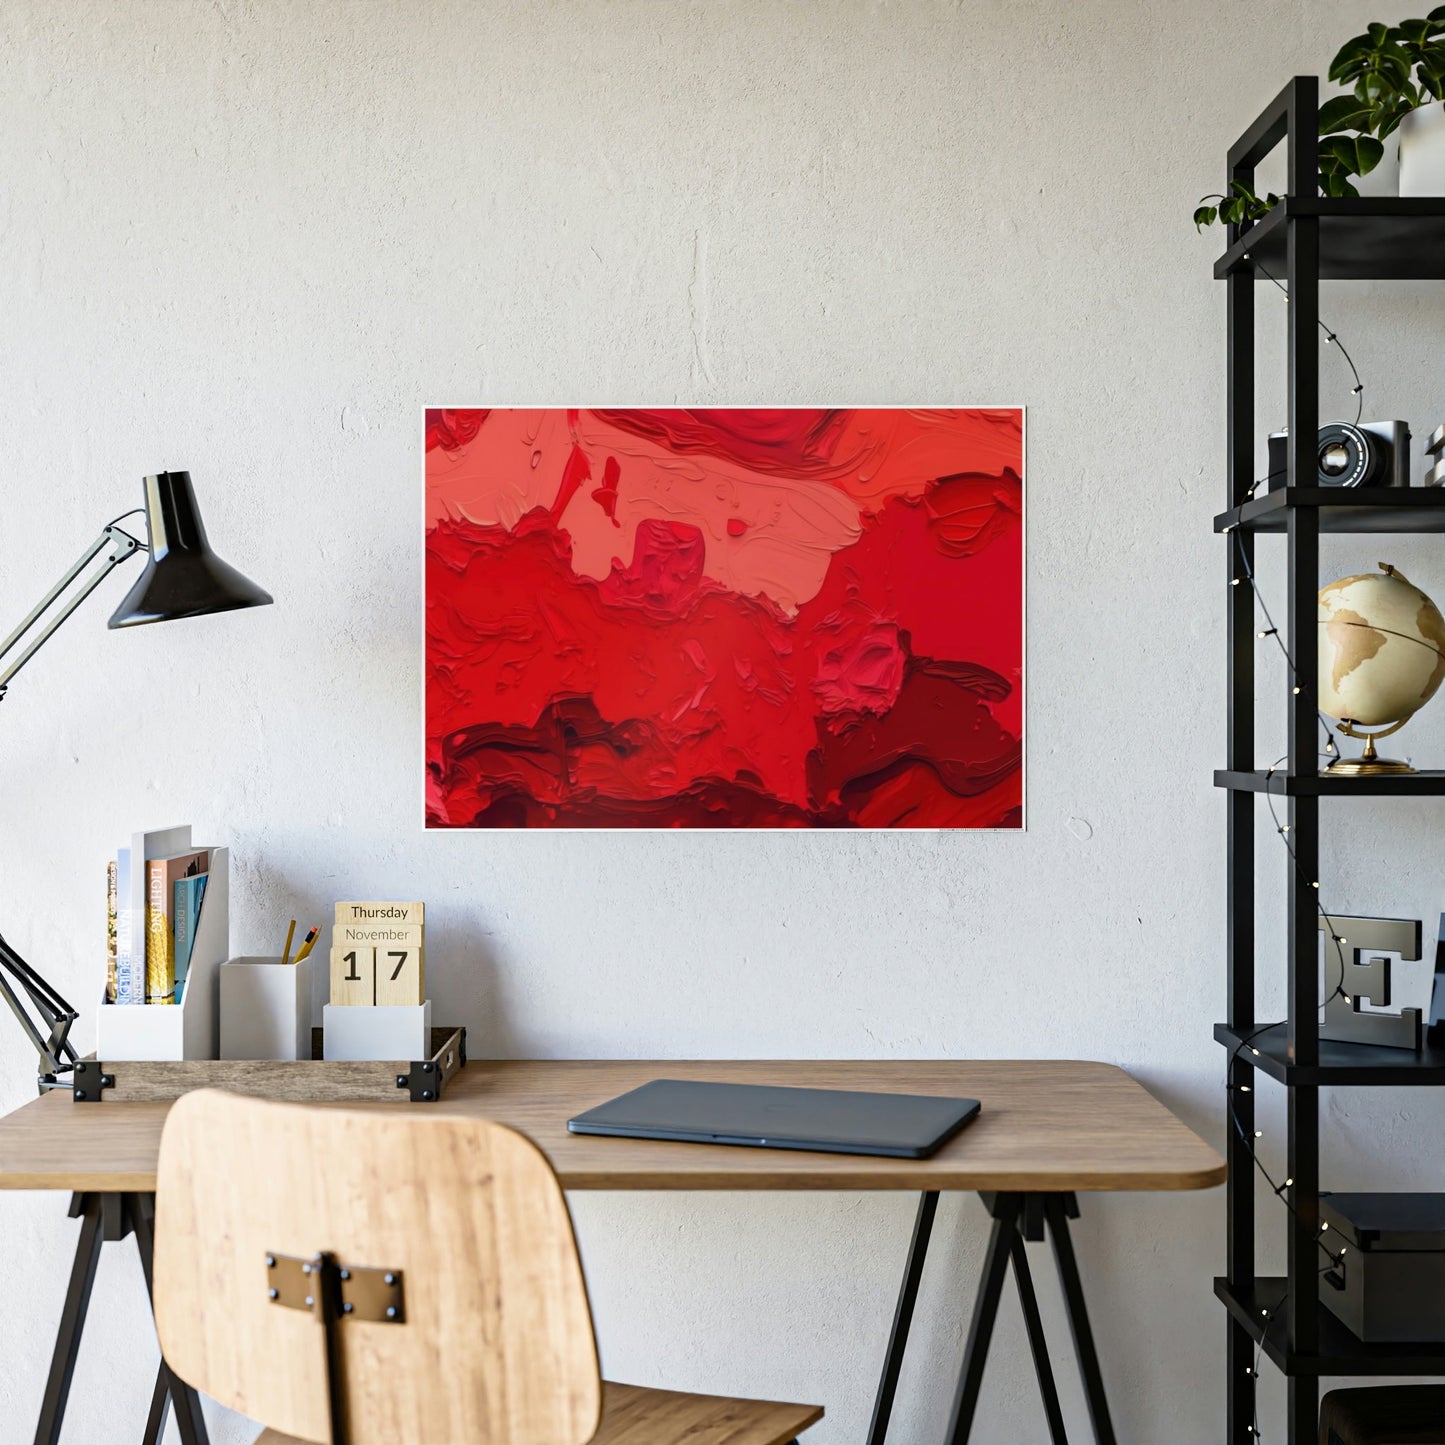 Abstract Fire: A Red Art Print on Framed Poster to Ignite Your Walls